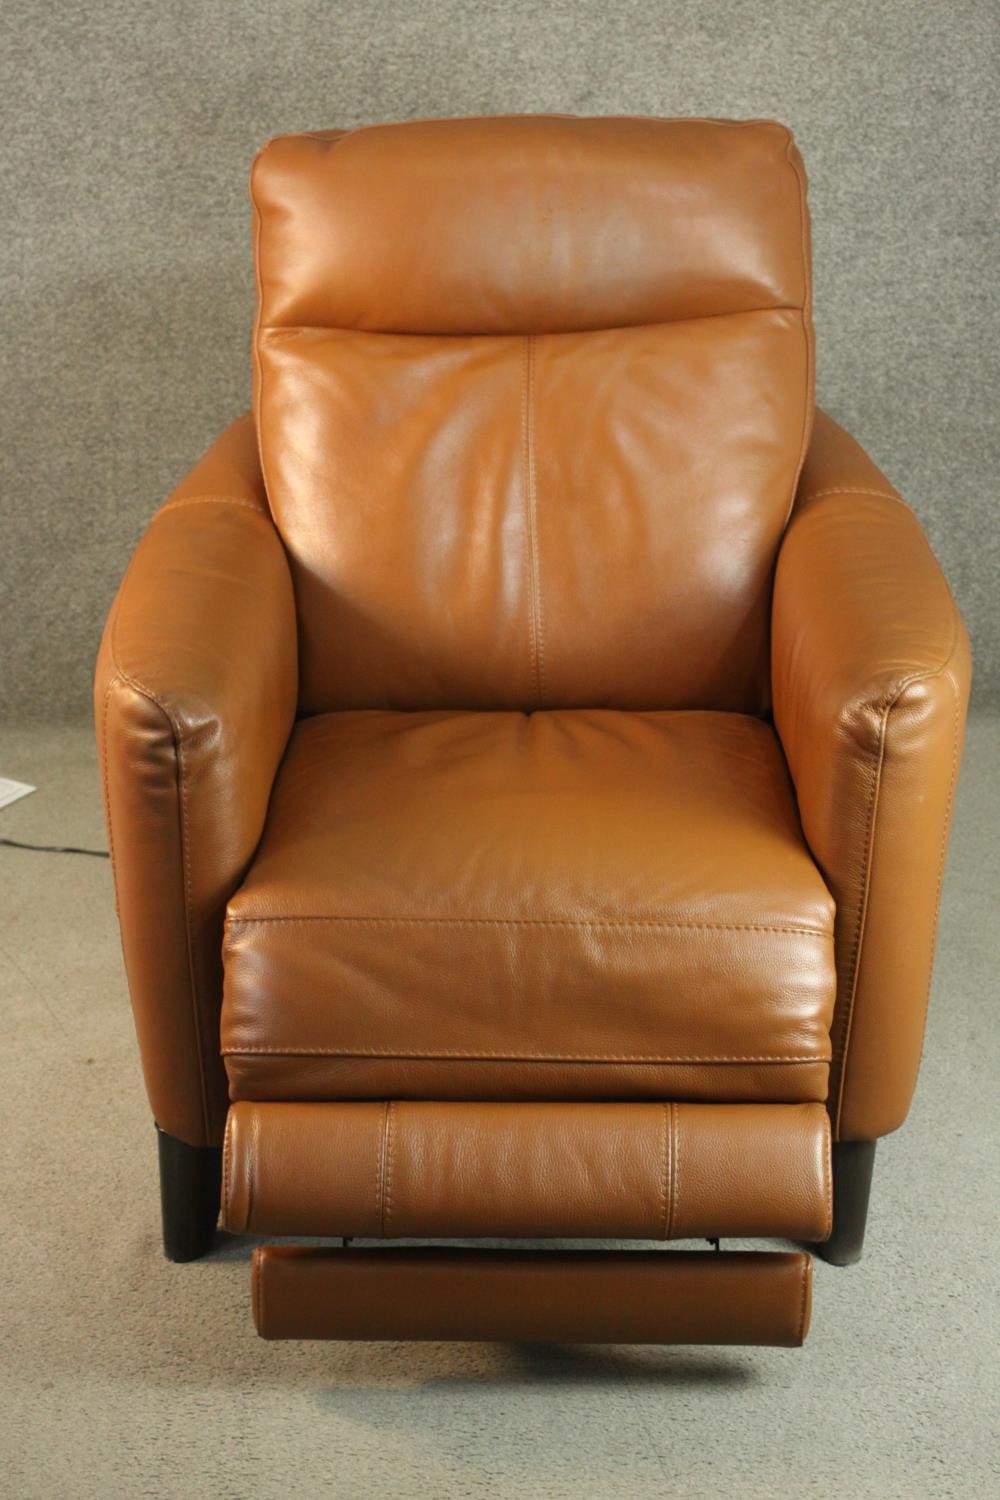 A contemporary tan leather electric reclining armchair, possibly Natuzzi, with instructions. In good